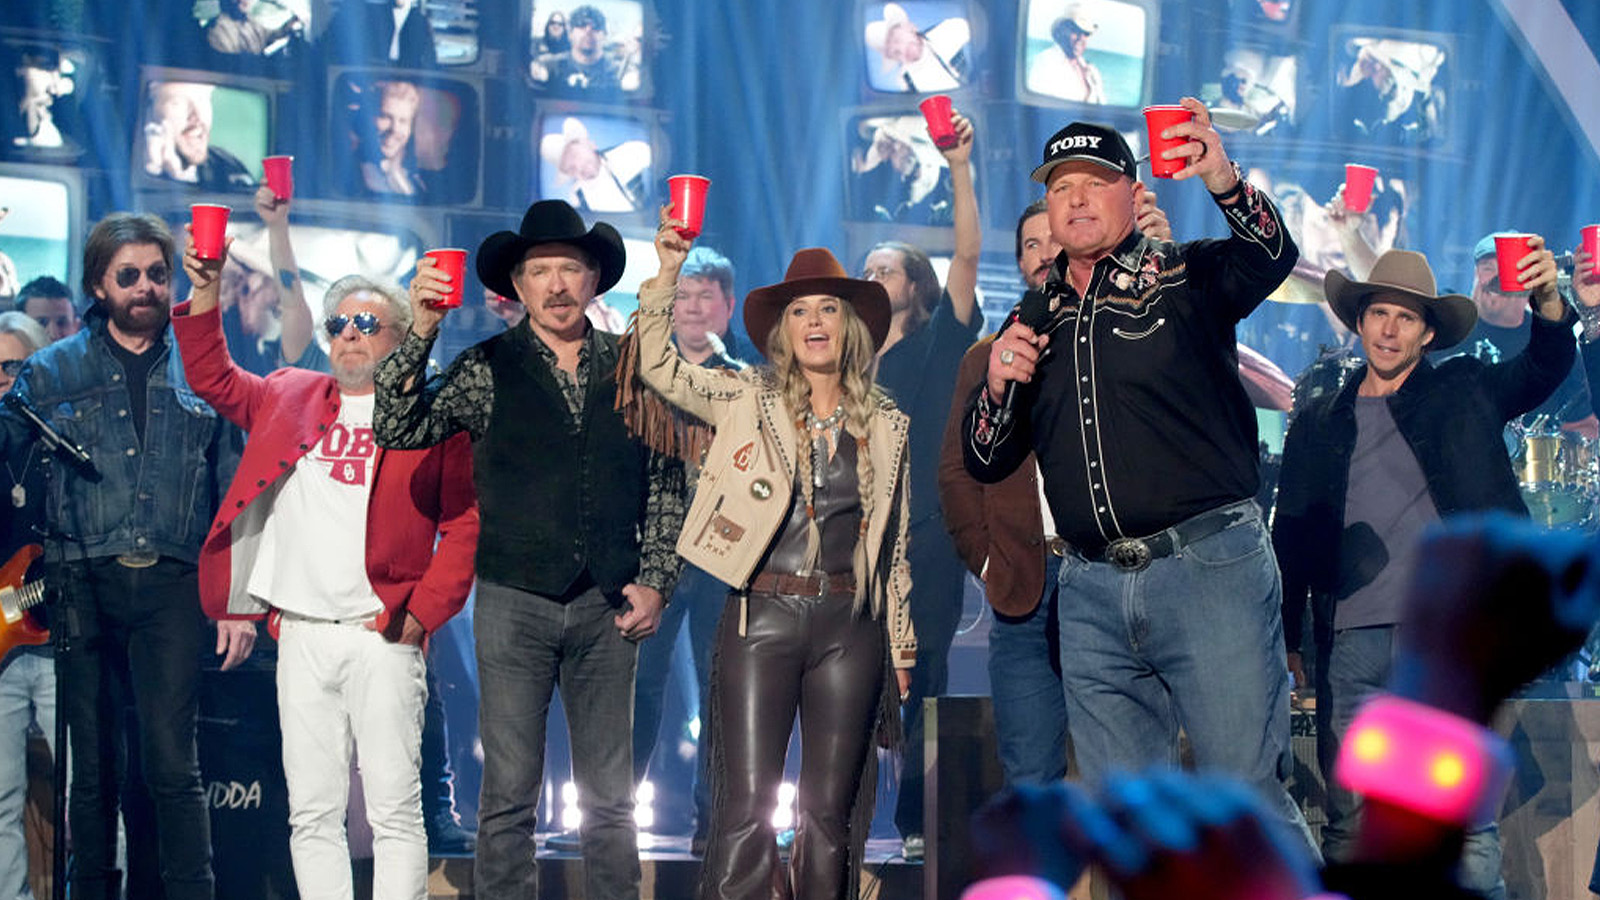 Toby Keith Refused To Honor Texas After Bet With Roger Clemens